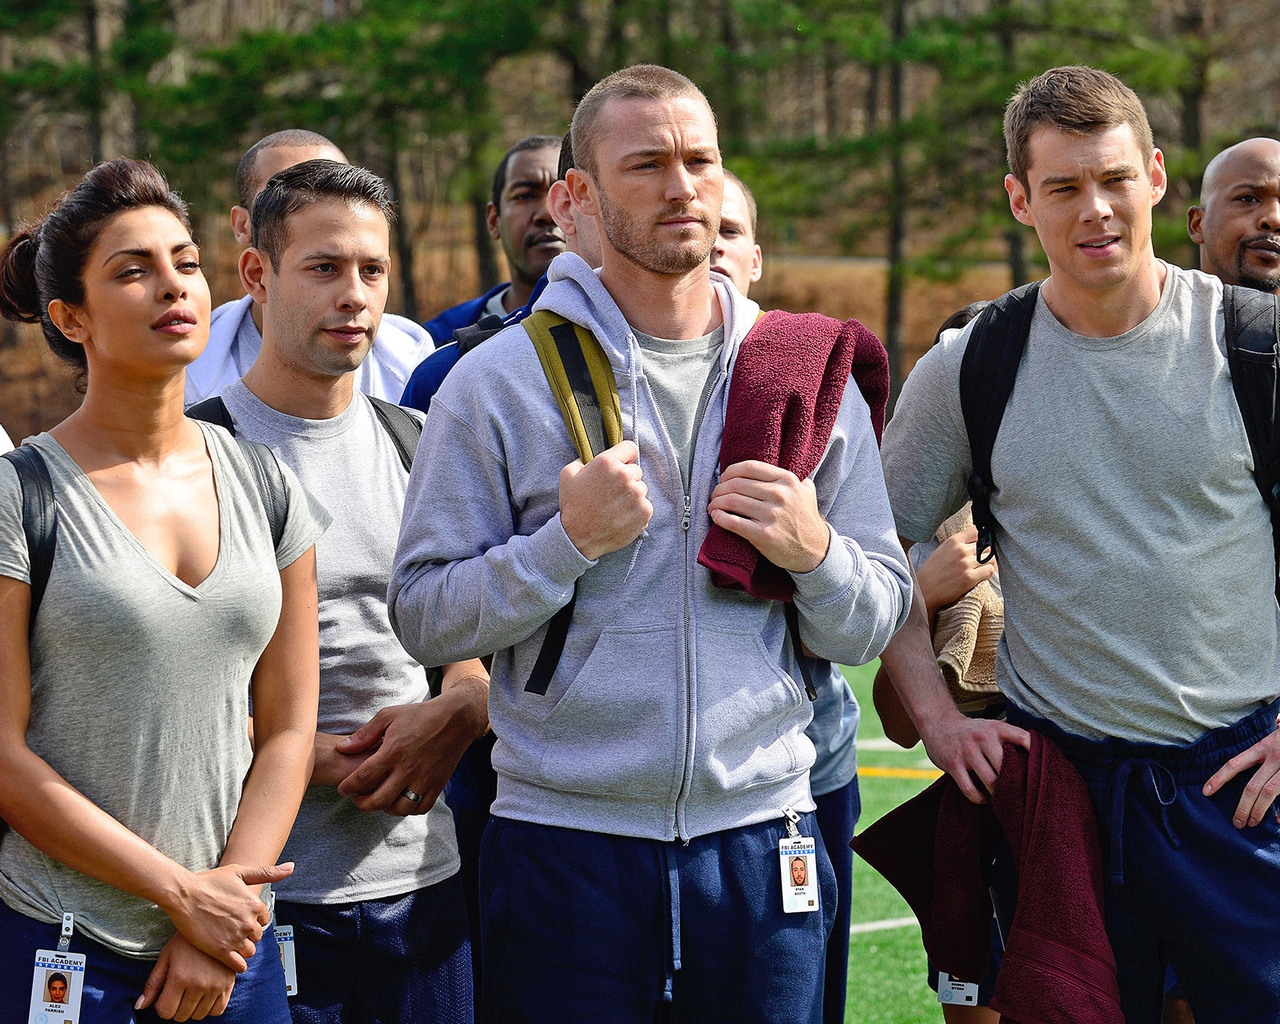 Quantico Characters for 1280 x 1024 resolution